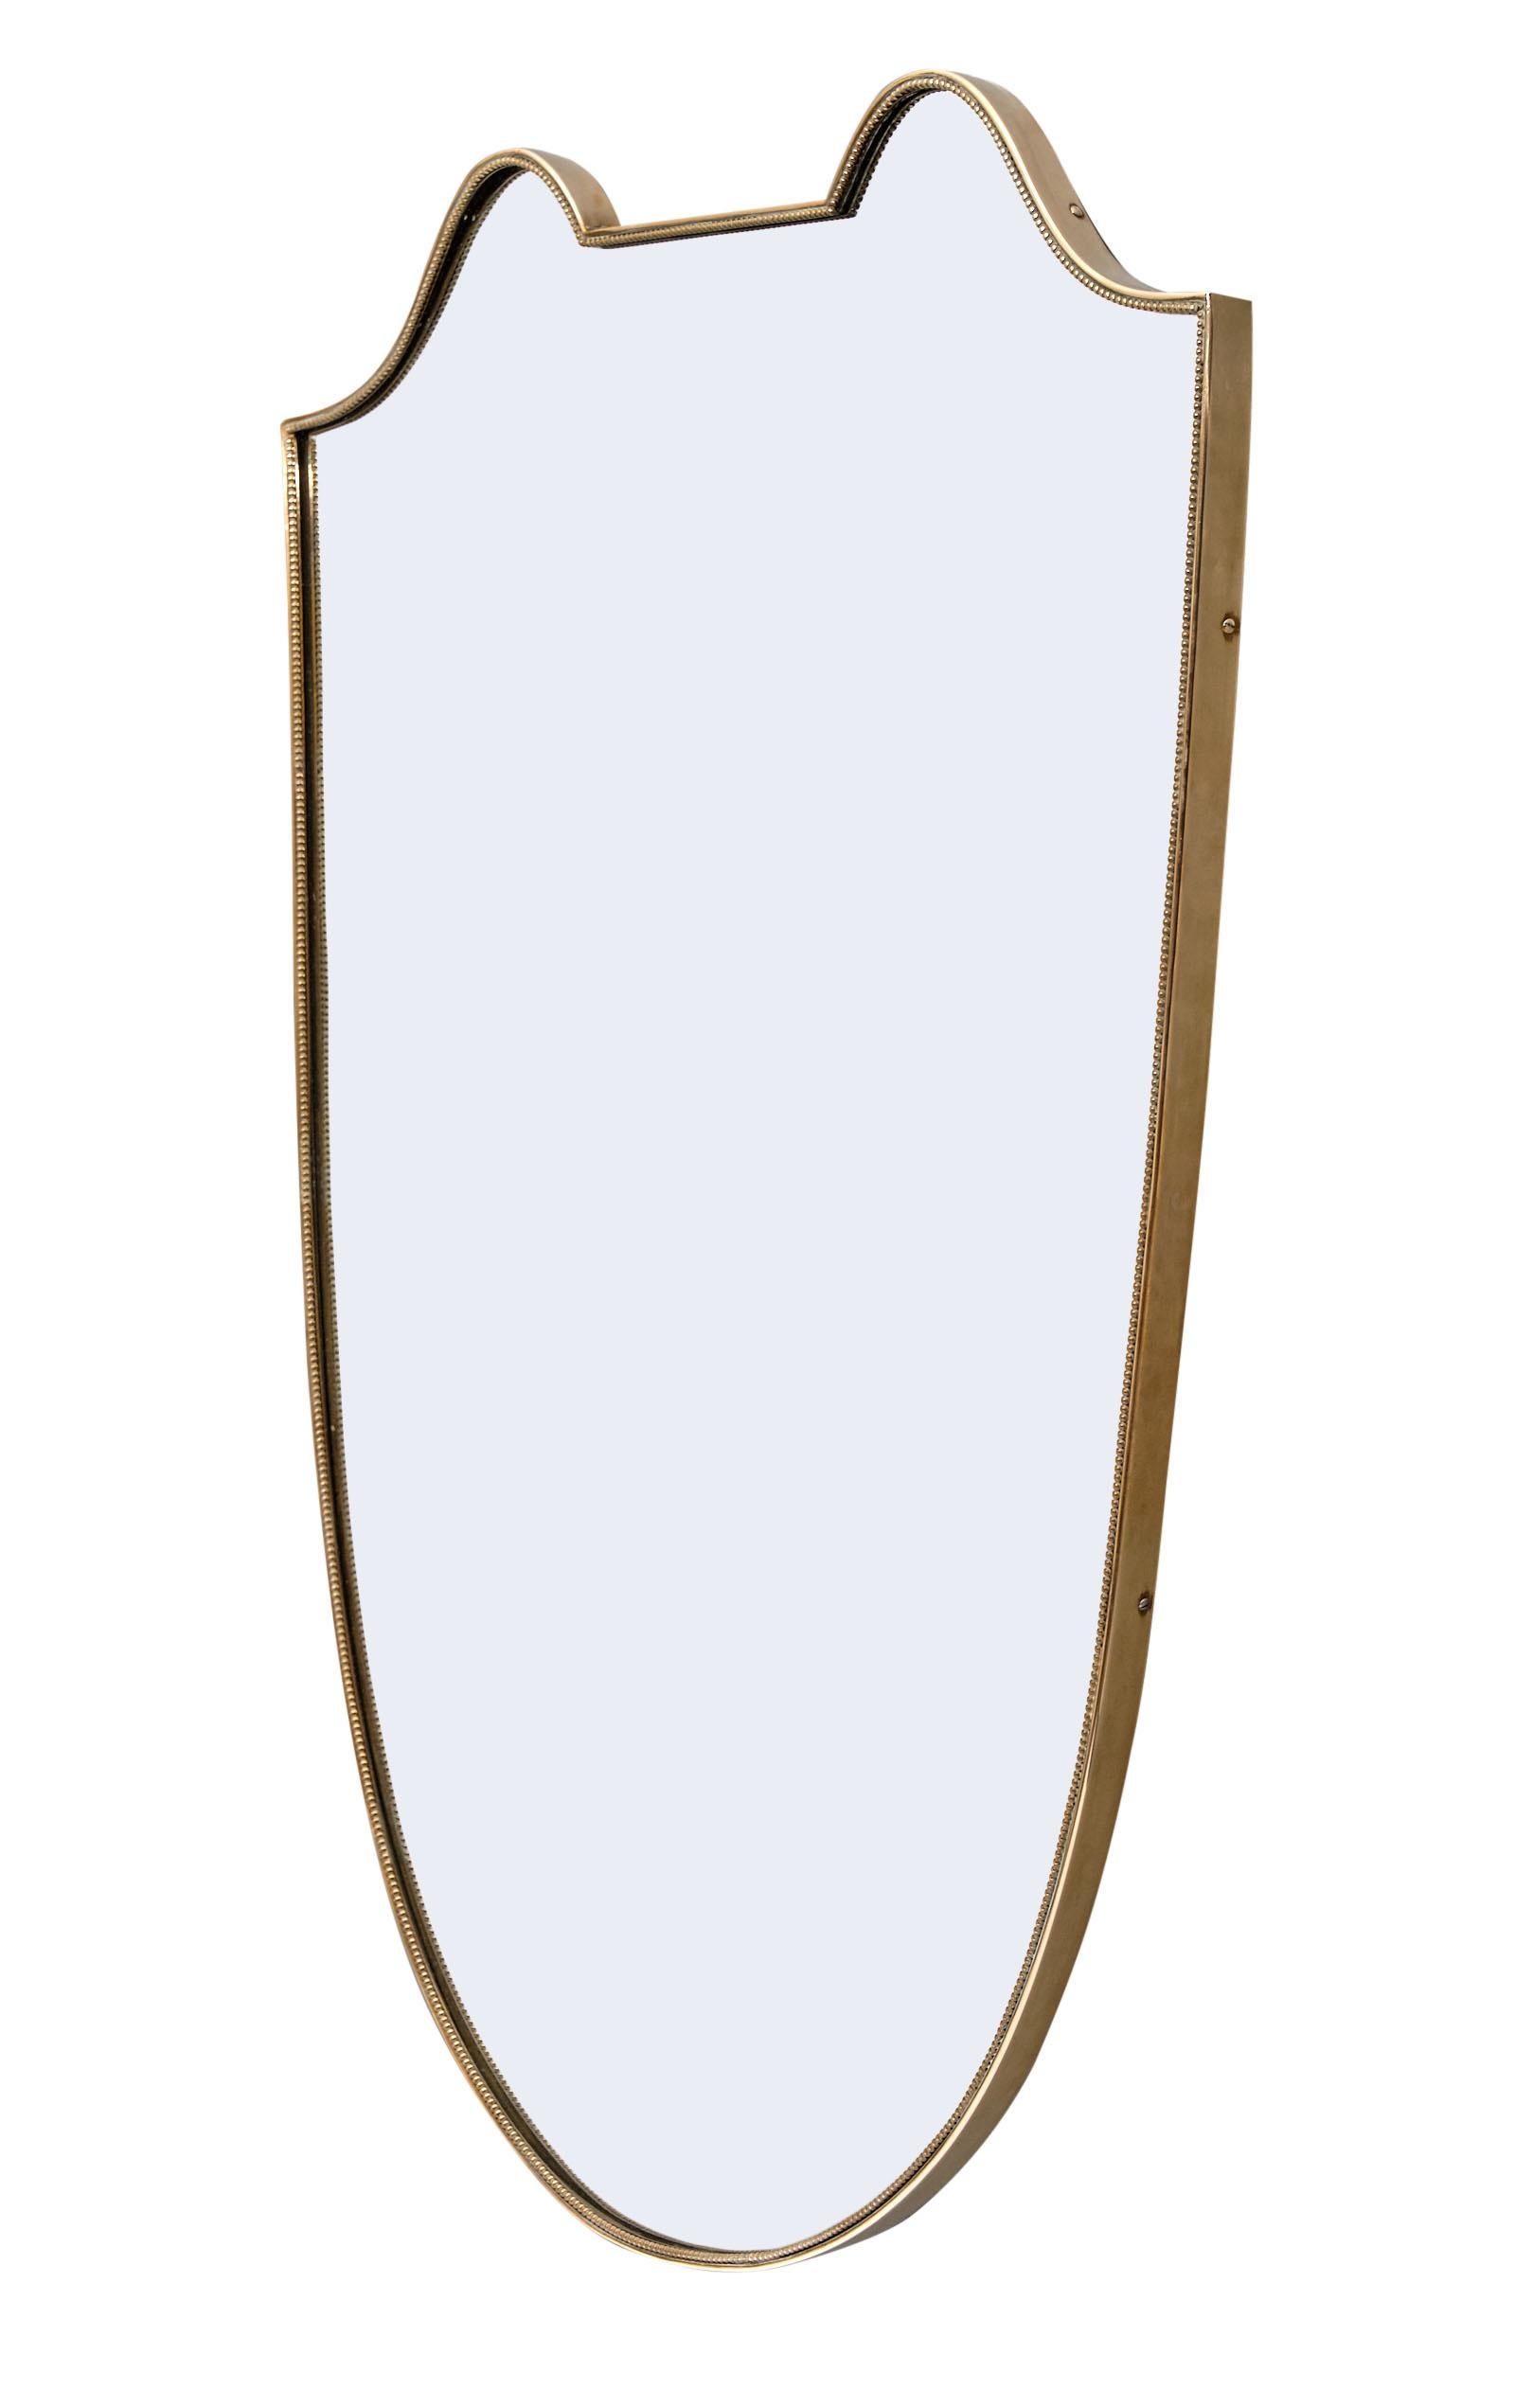 Italian Art Deco period mirror with a brass frame highlighting beautiful curved lines. We love this unique and authentic piece!